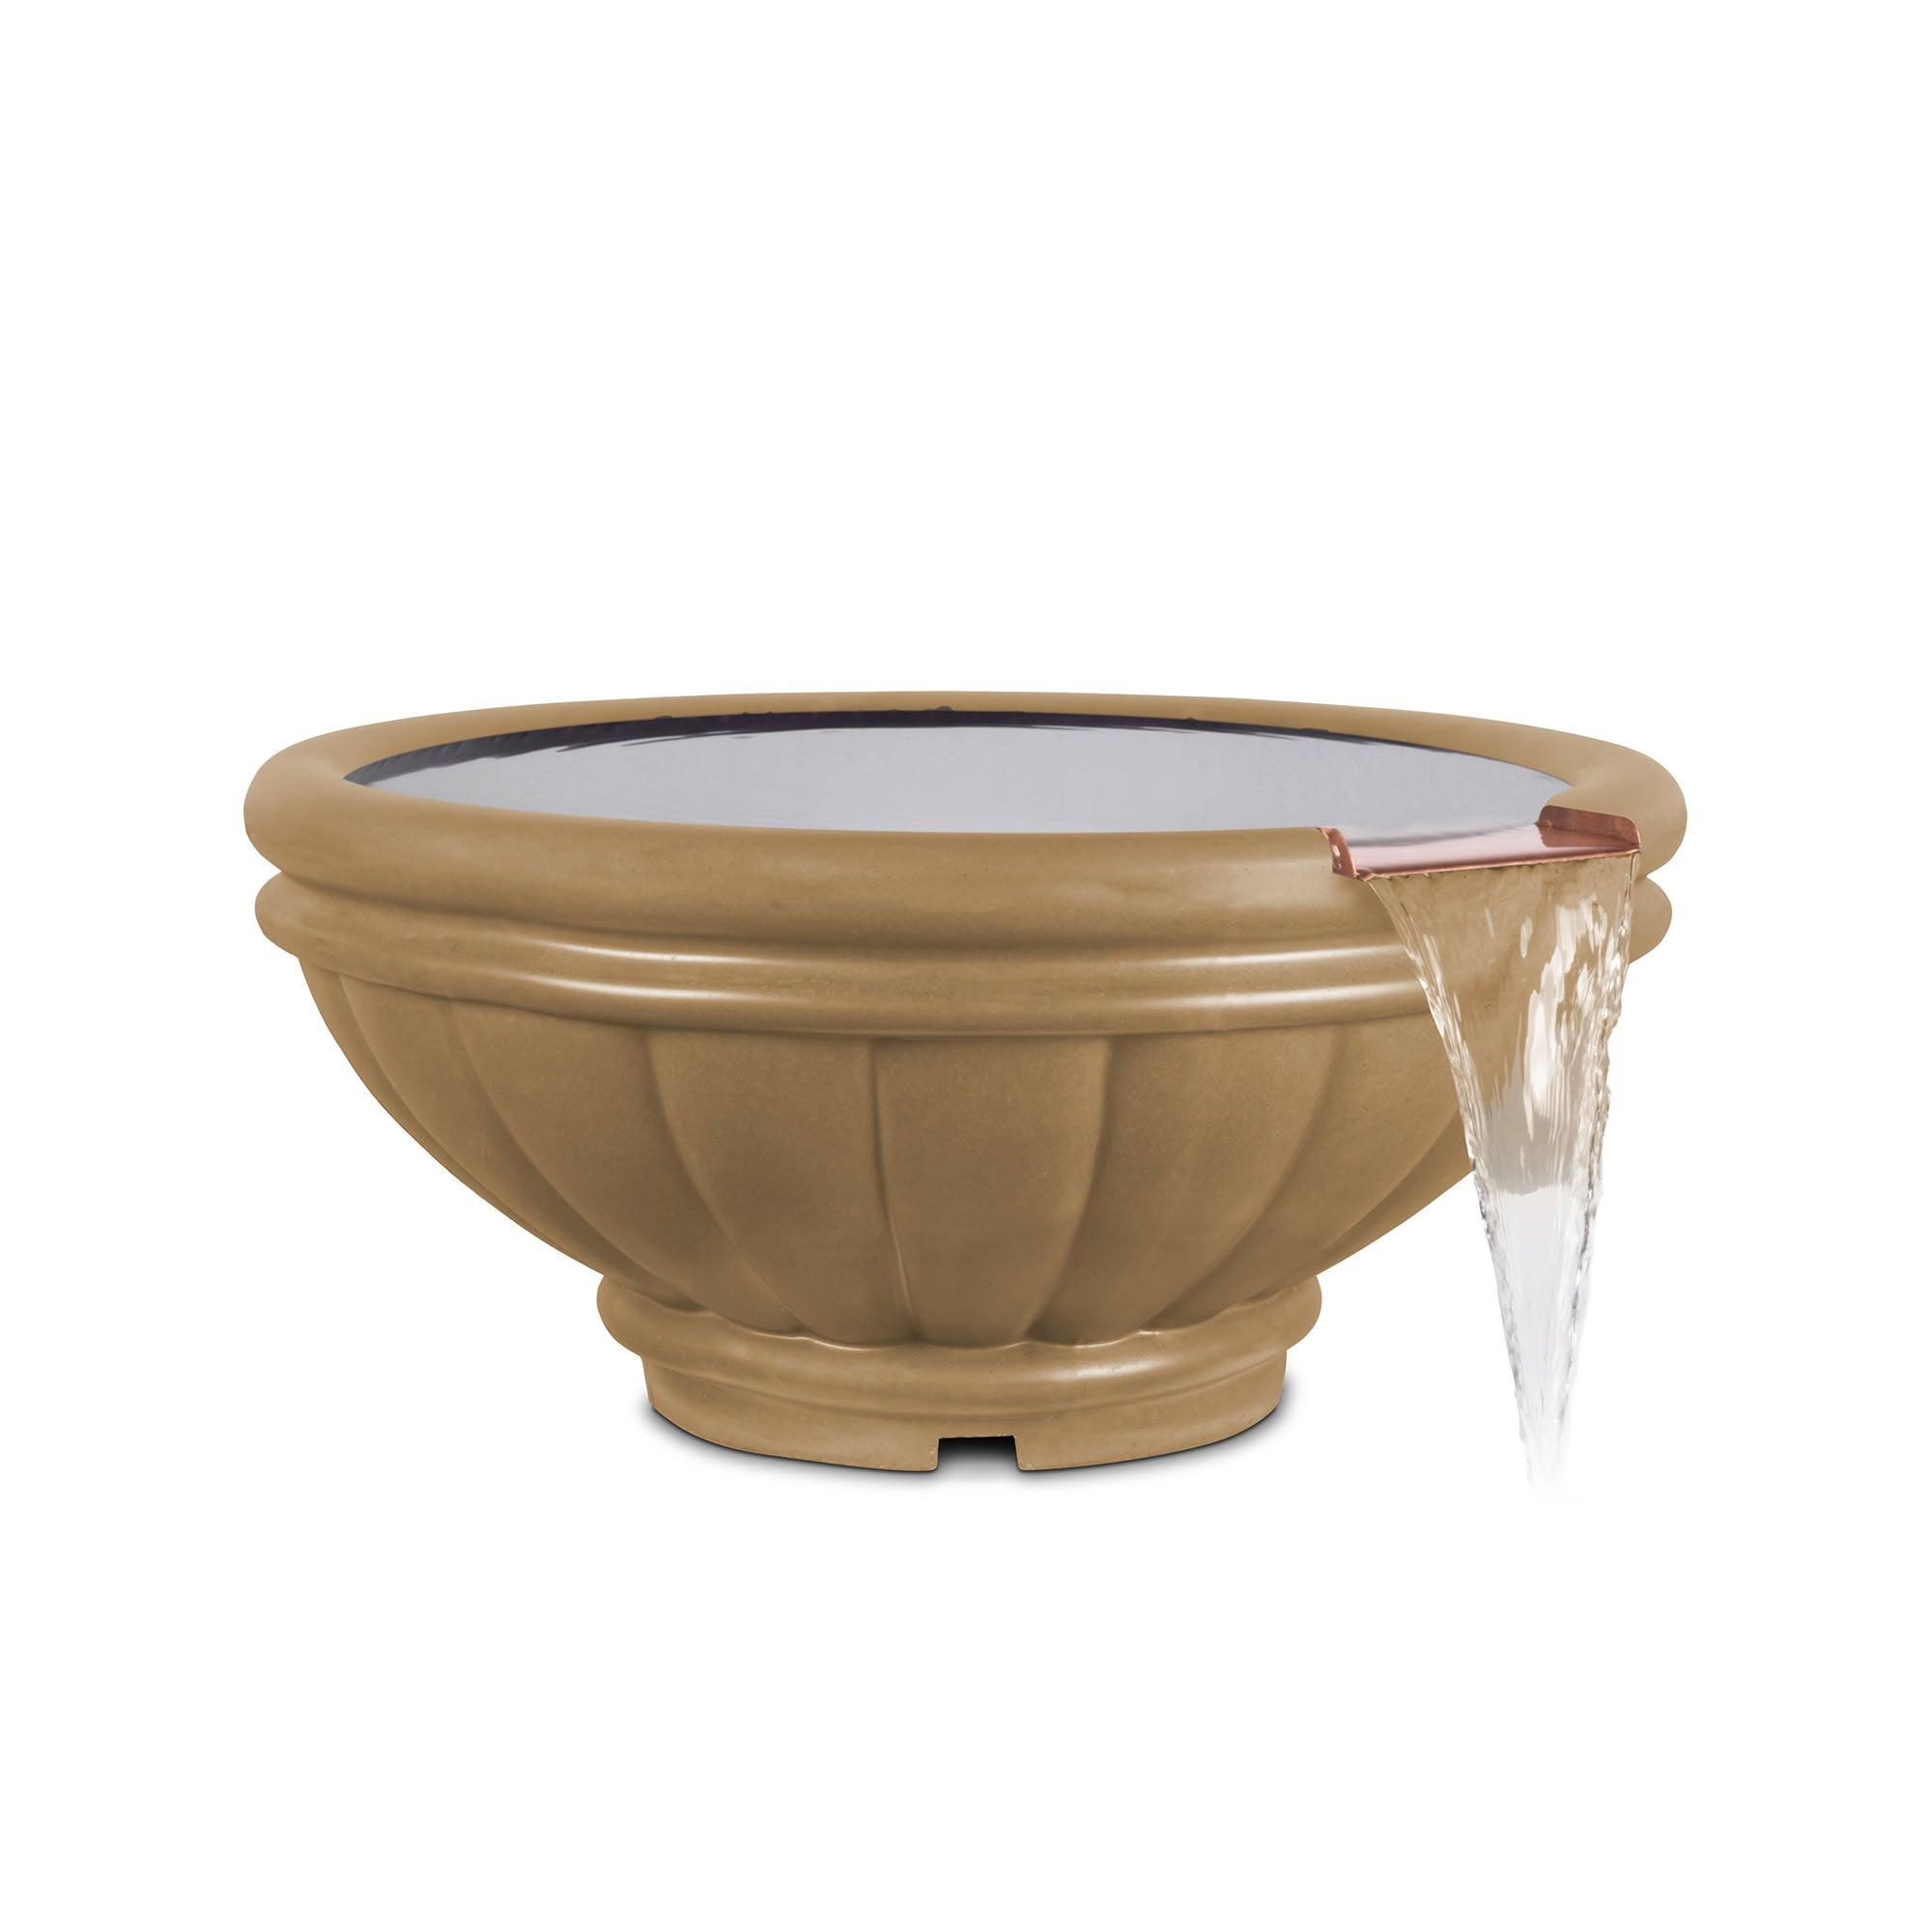 The Outdoor Plus Roma Concrete Water Bowls